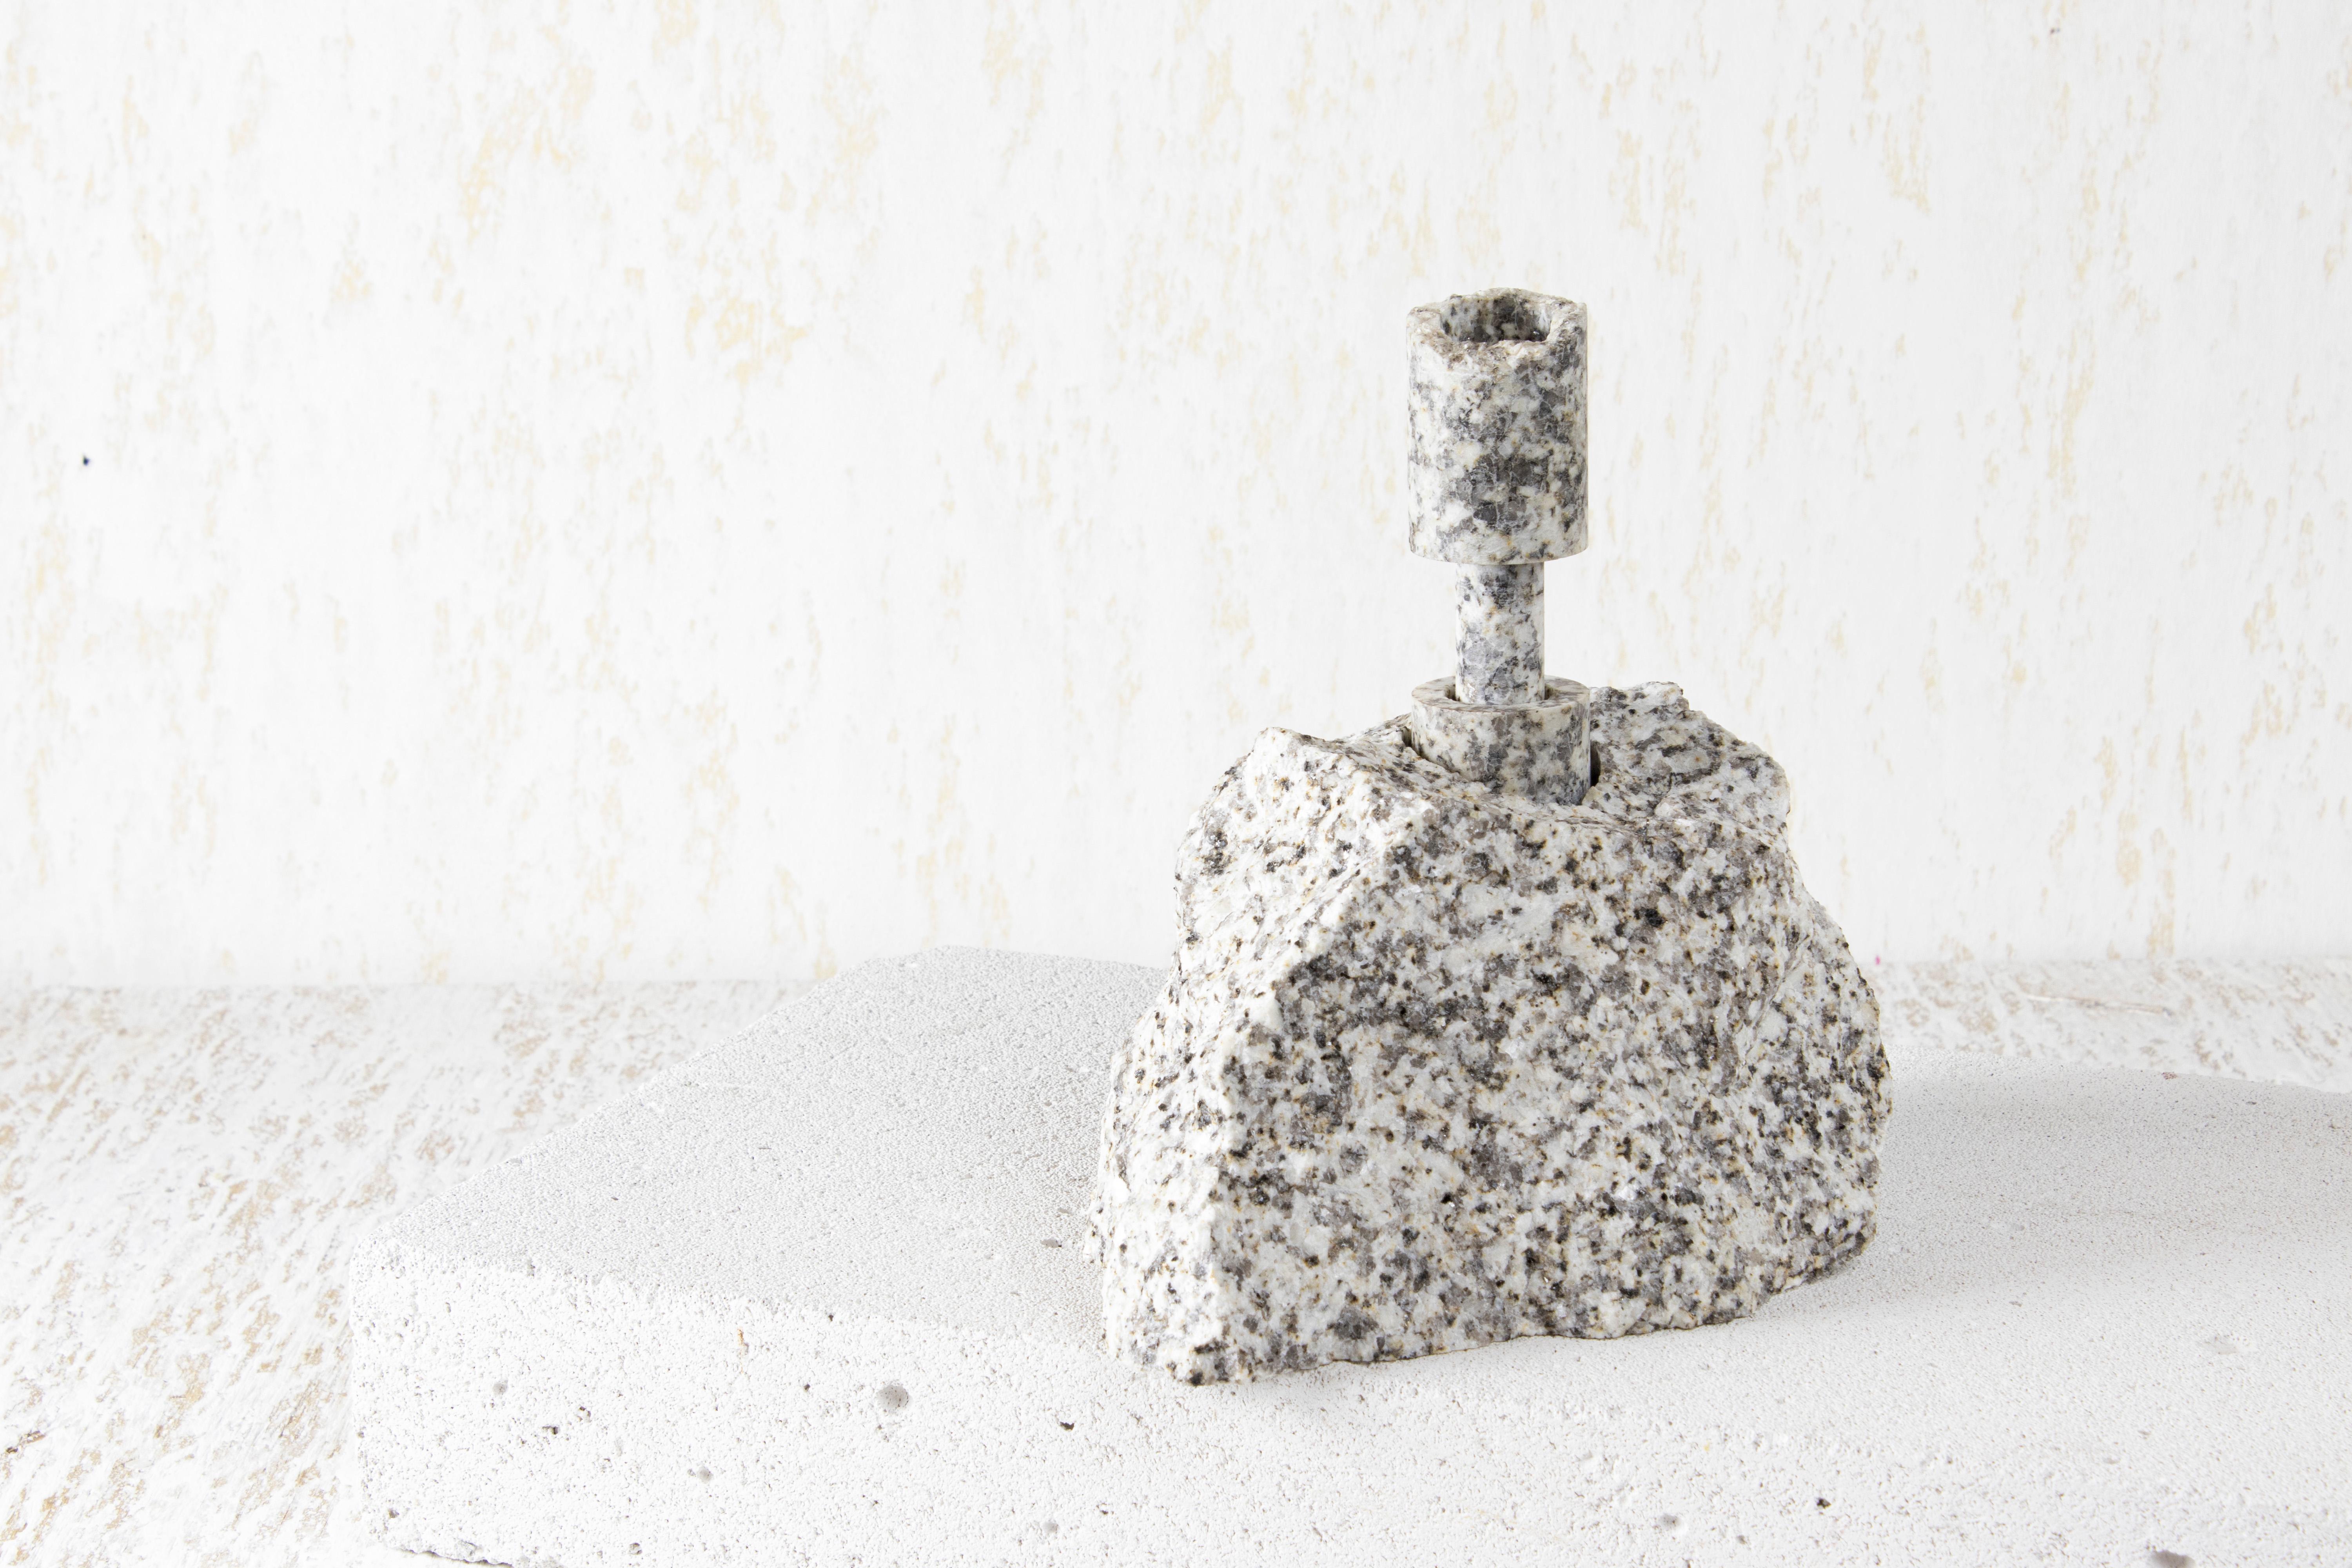 White Granite Abra Candelabra I by Studio DO
Dimensions: D 17 x W 12.5 x H 18 cm
Materials: Granite, aluminum.
3.2 kg.

Stone and fire are connected in an ageless bond. A sparkle created by clashing two stones with each other has been igniting fire